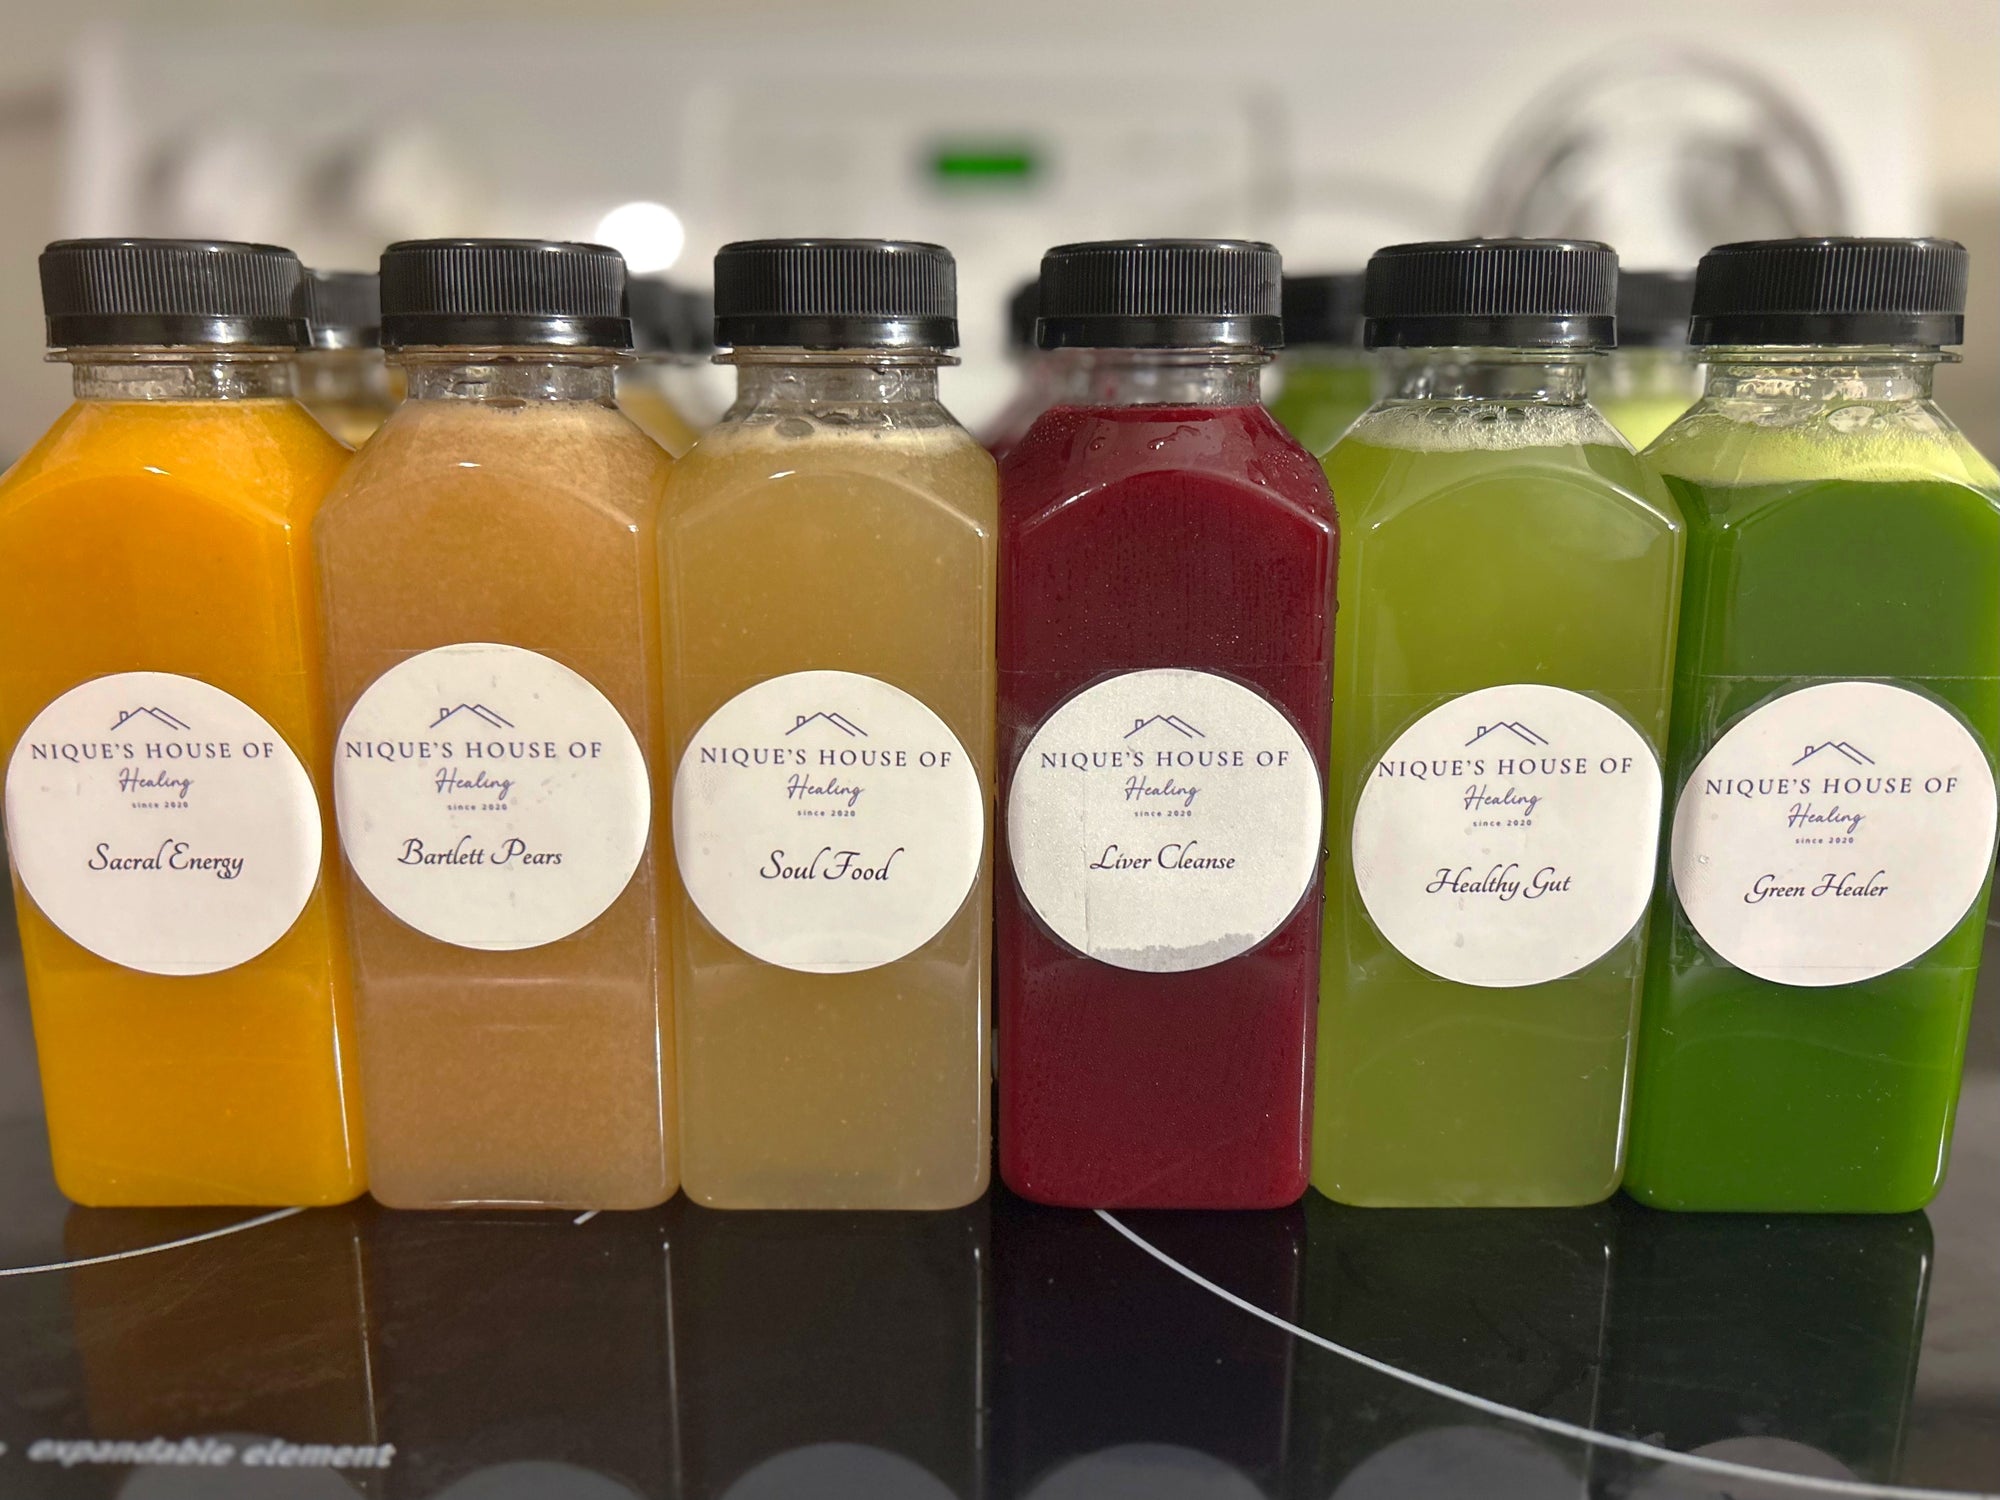 1 day juice cleanse - Nique's House of Healing